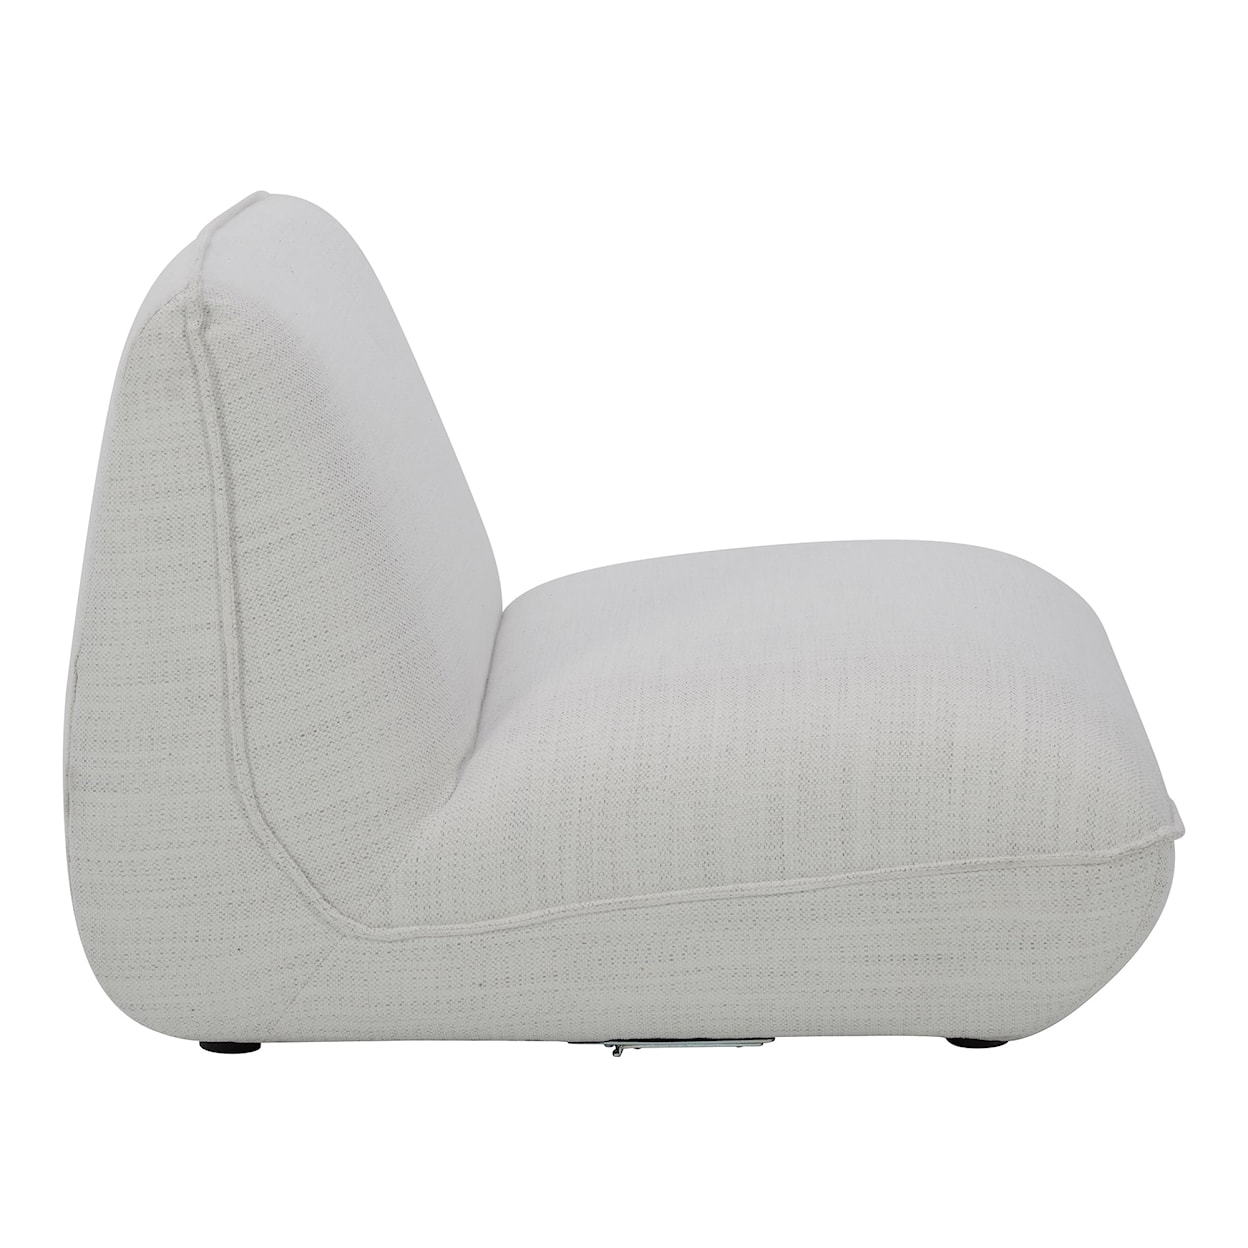 Moe's Home Collection Zeppelin Stone White Slipper Chair